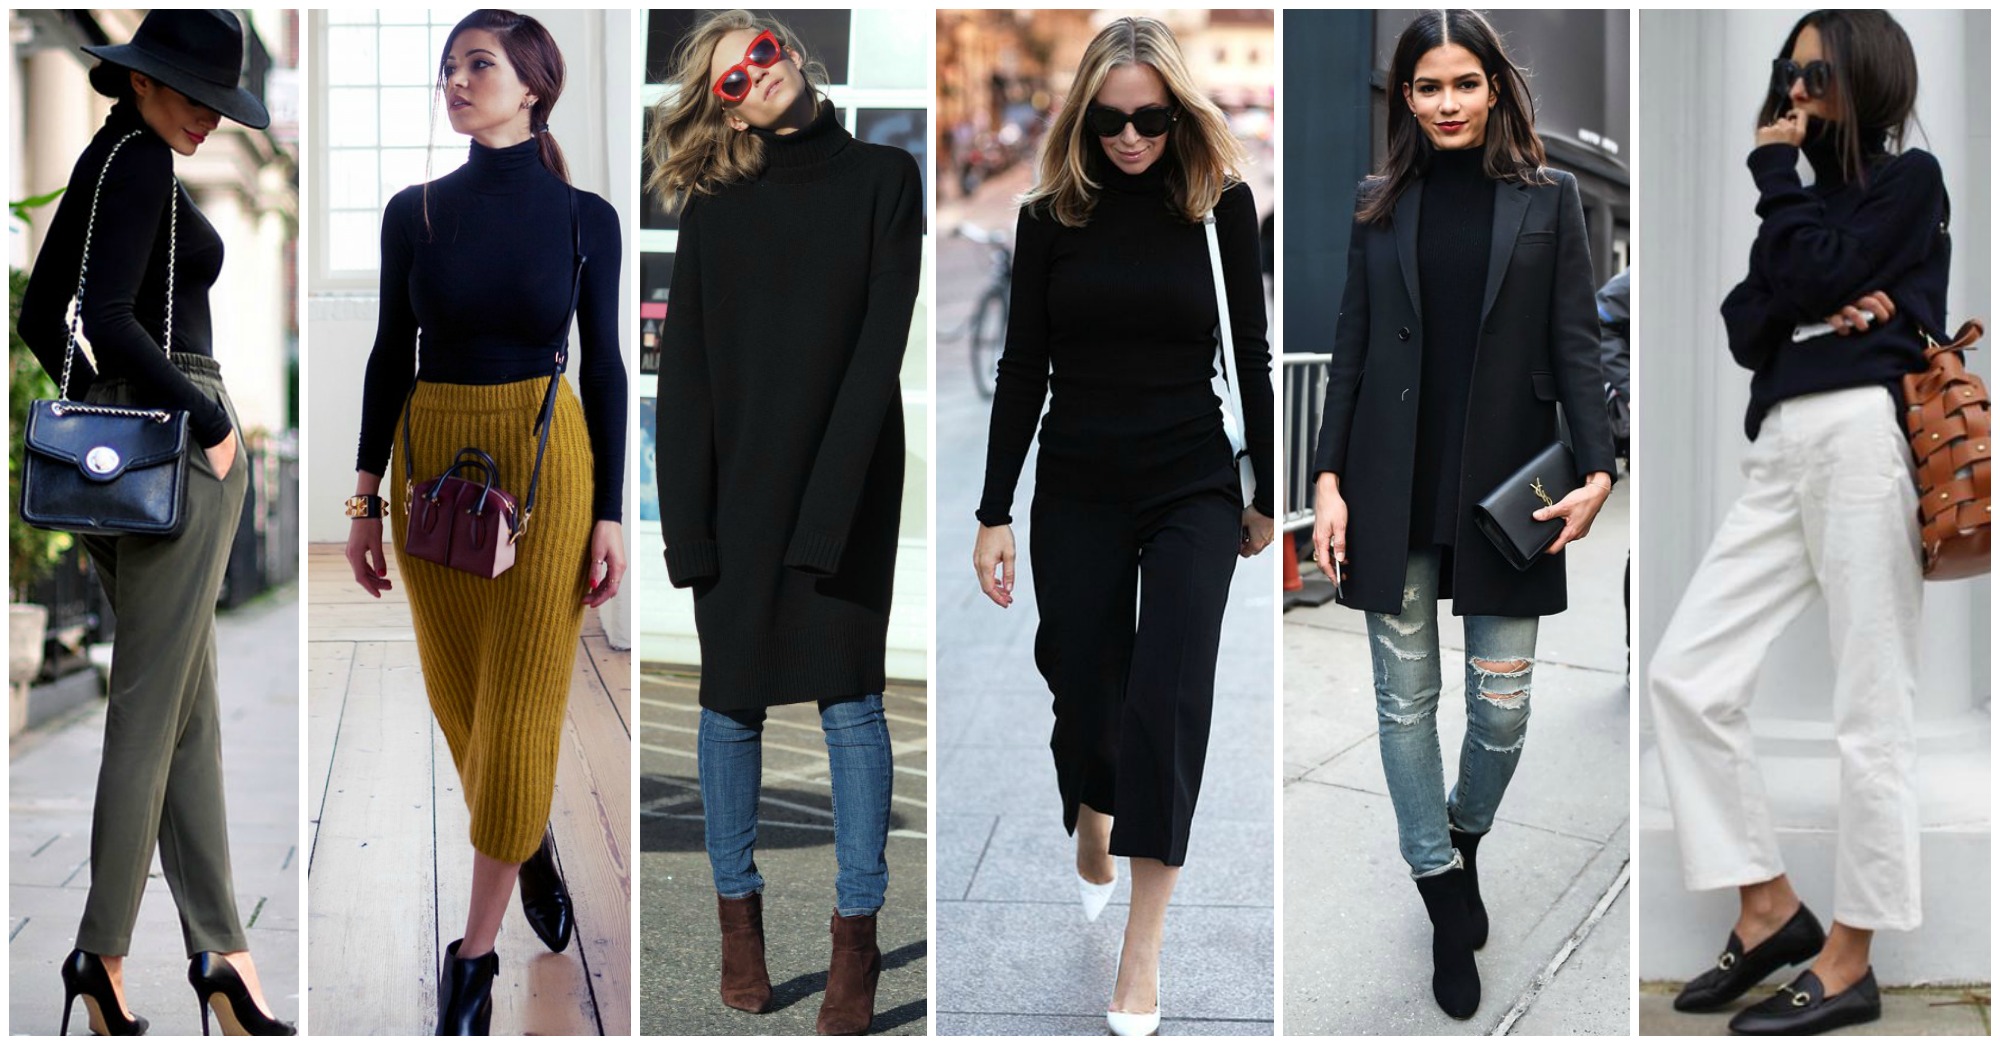 21 Simple Ways to Wear Your Black Turtleneck and Look Stunning